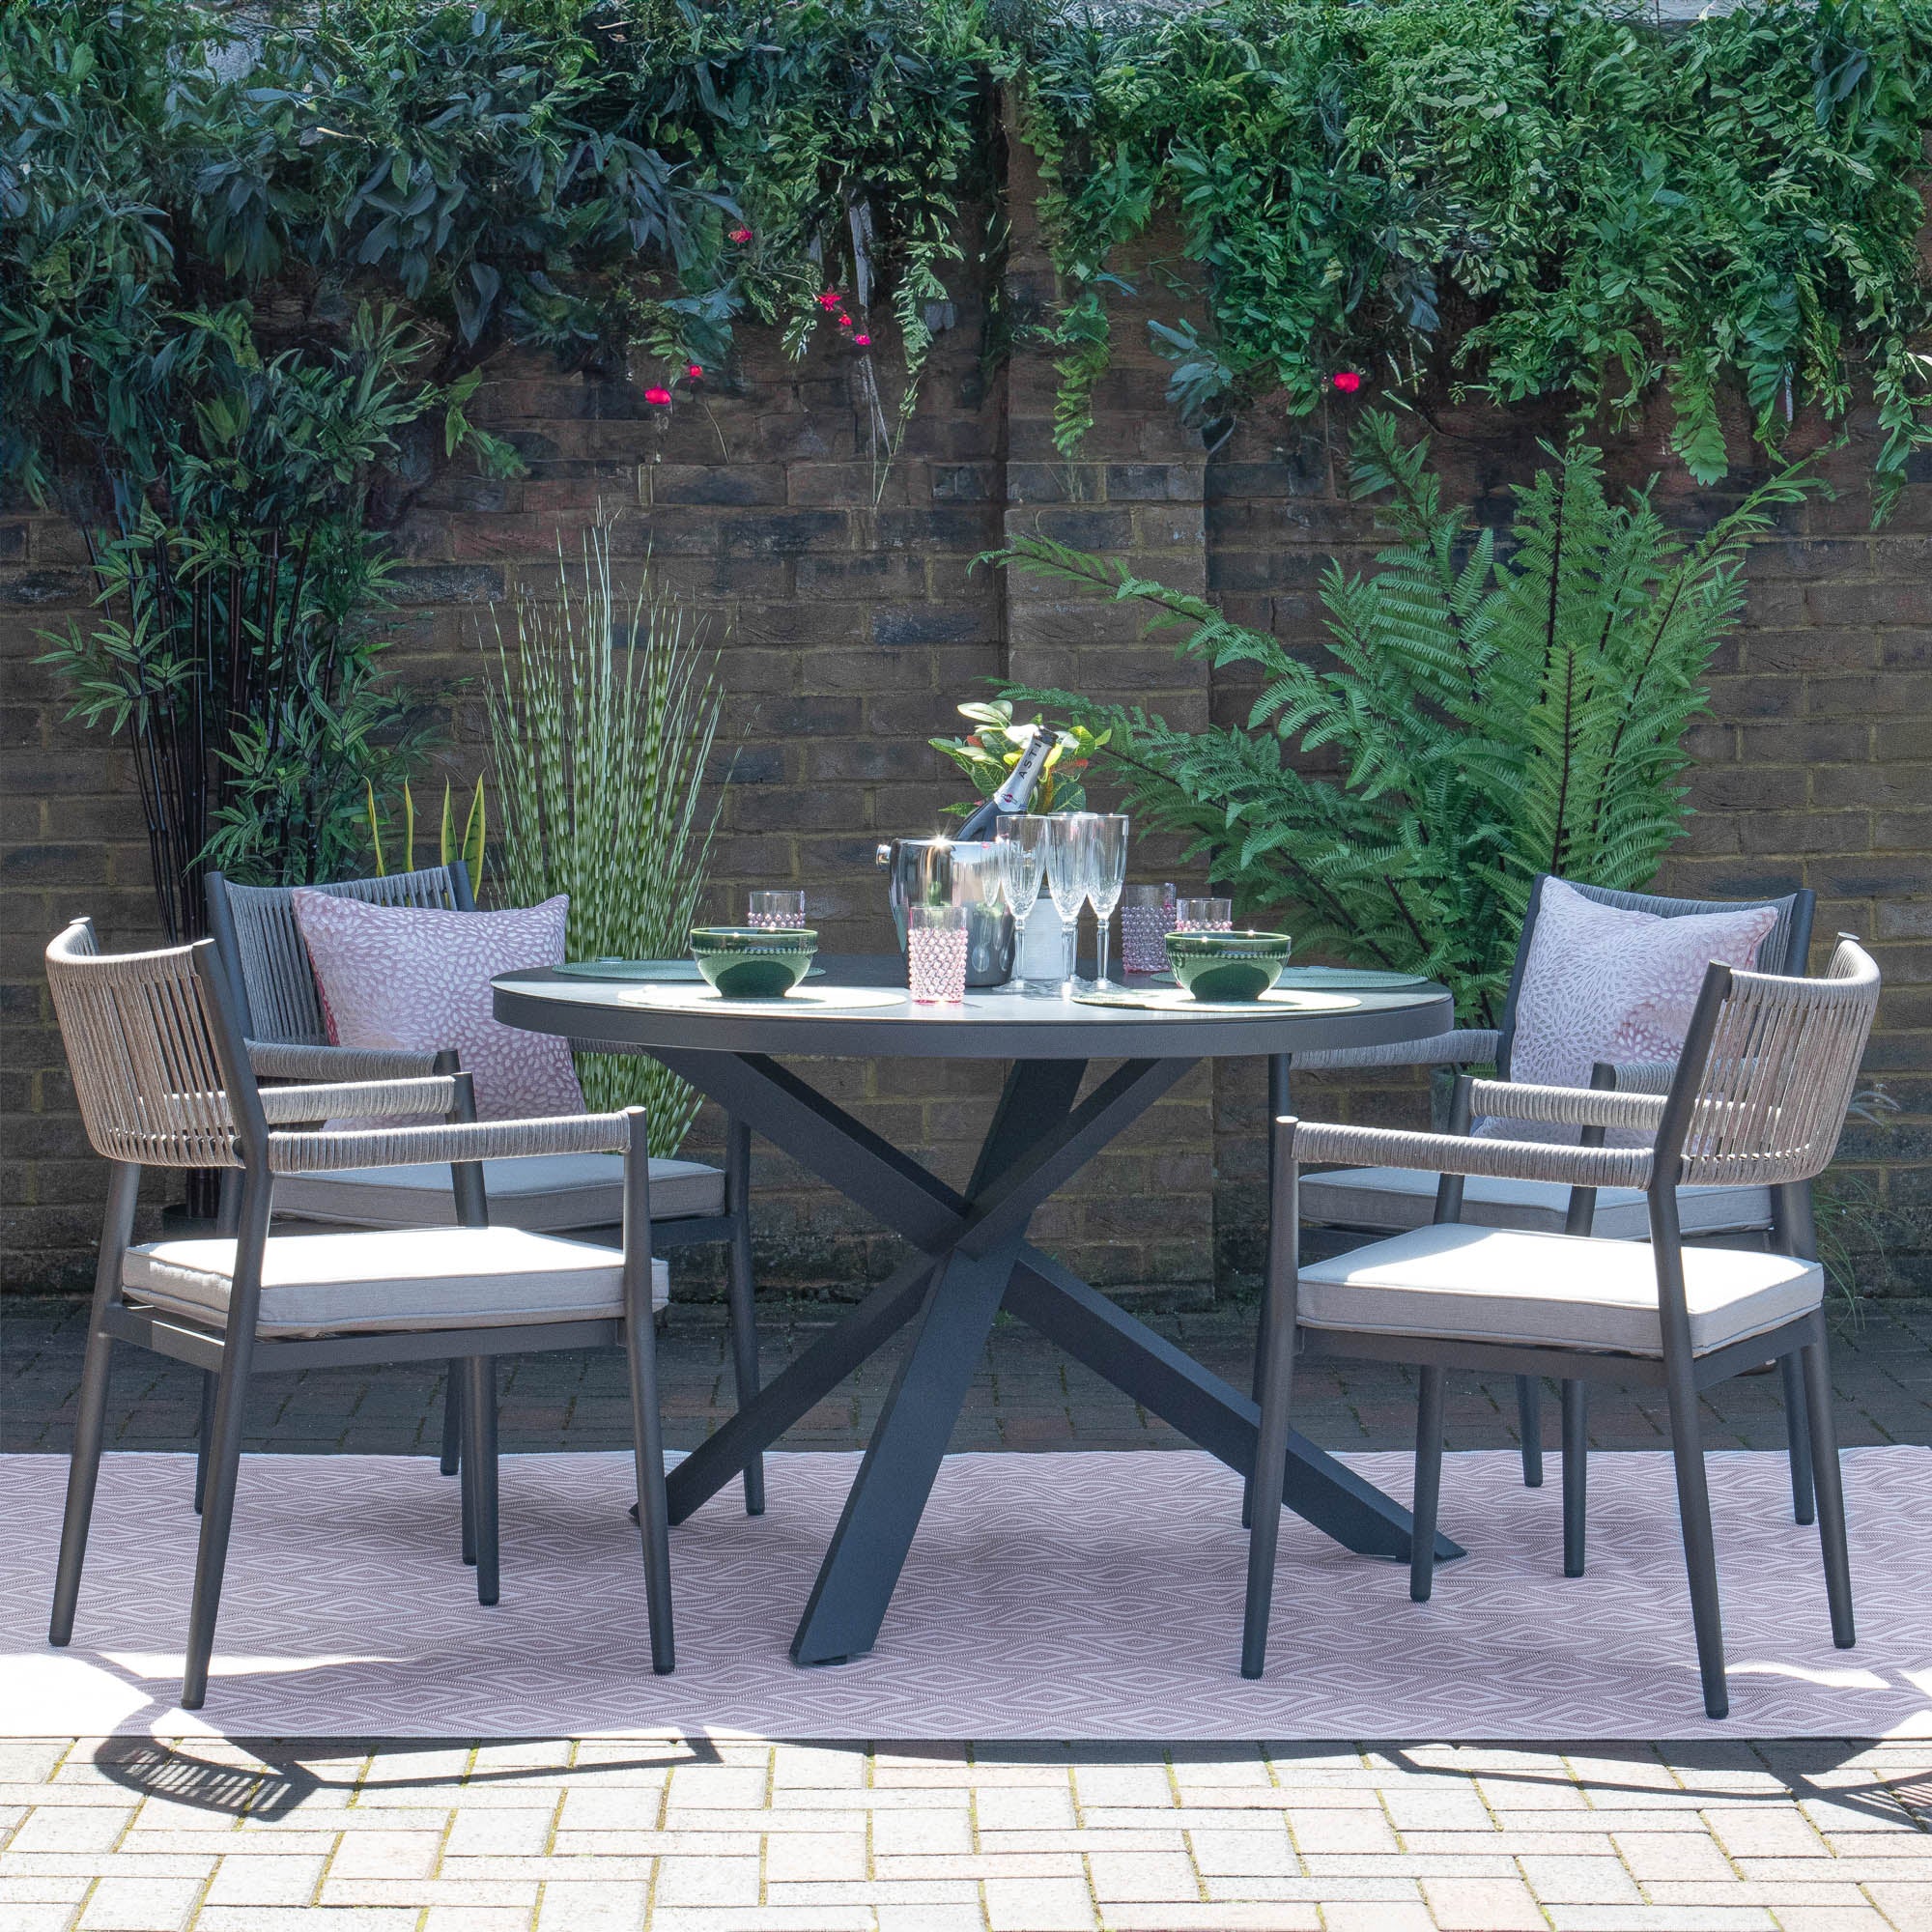 4 Seat Round Dining Set In Clay Stone Grey